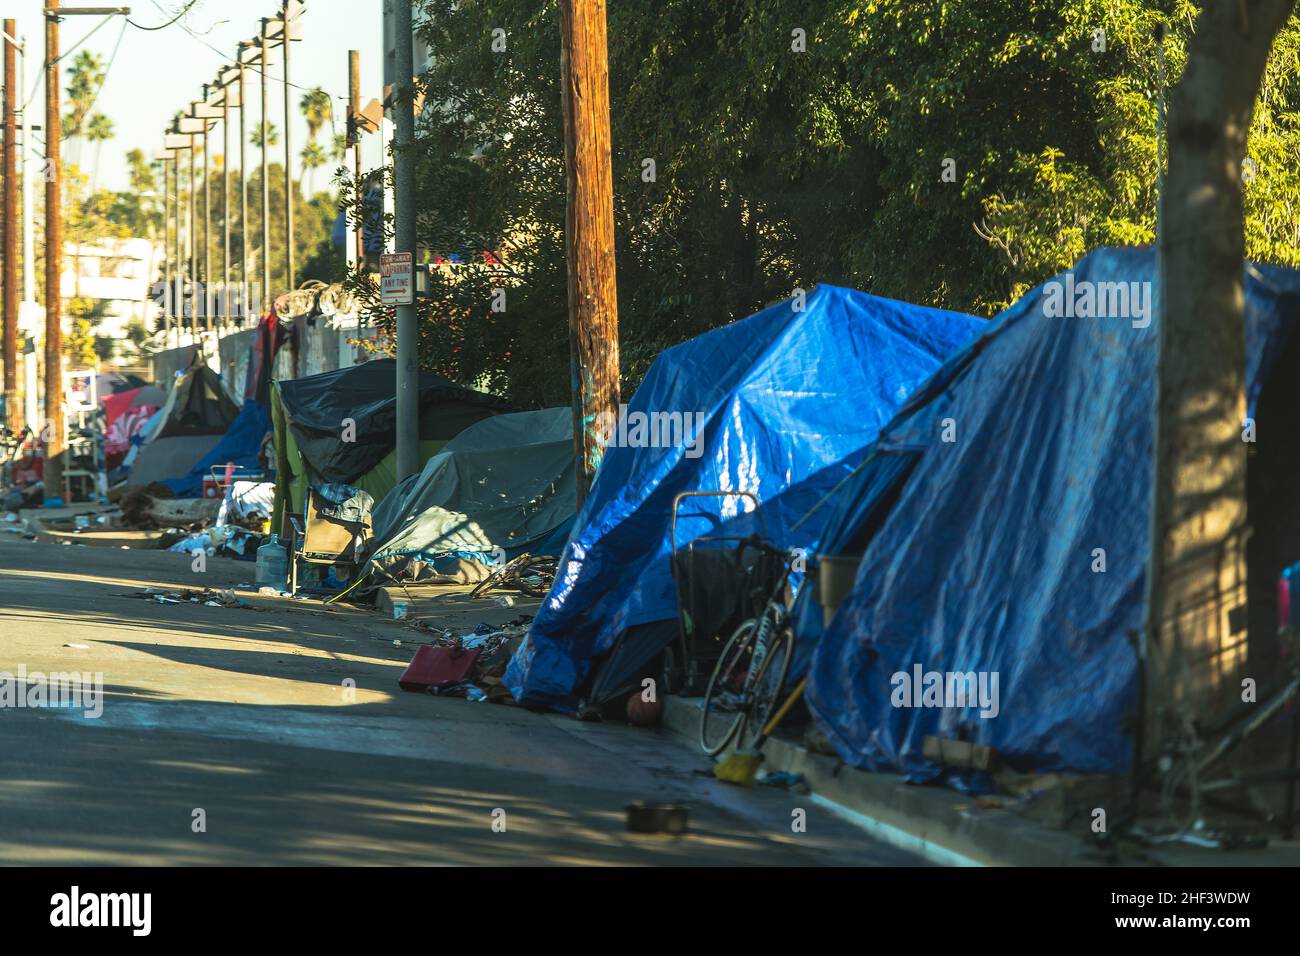 West Hollywood Homelessness Wild Tents Camp. Homeless People in the Middle of the Modern American City. Stock Photo